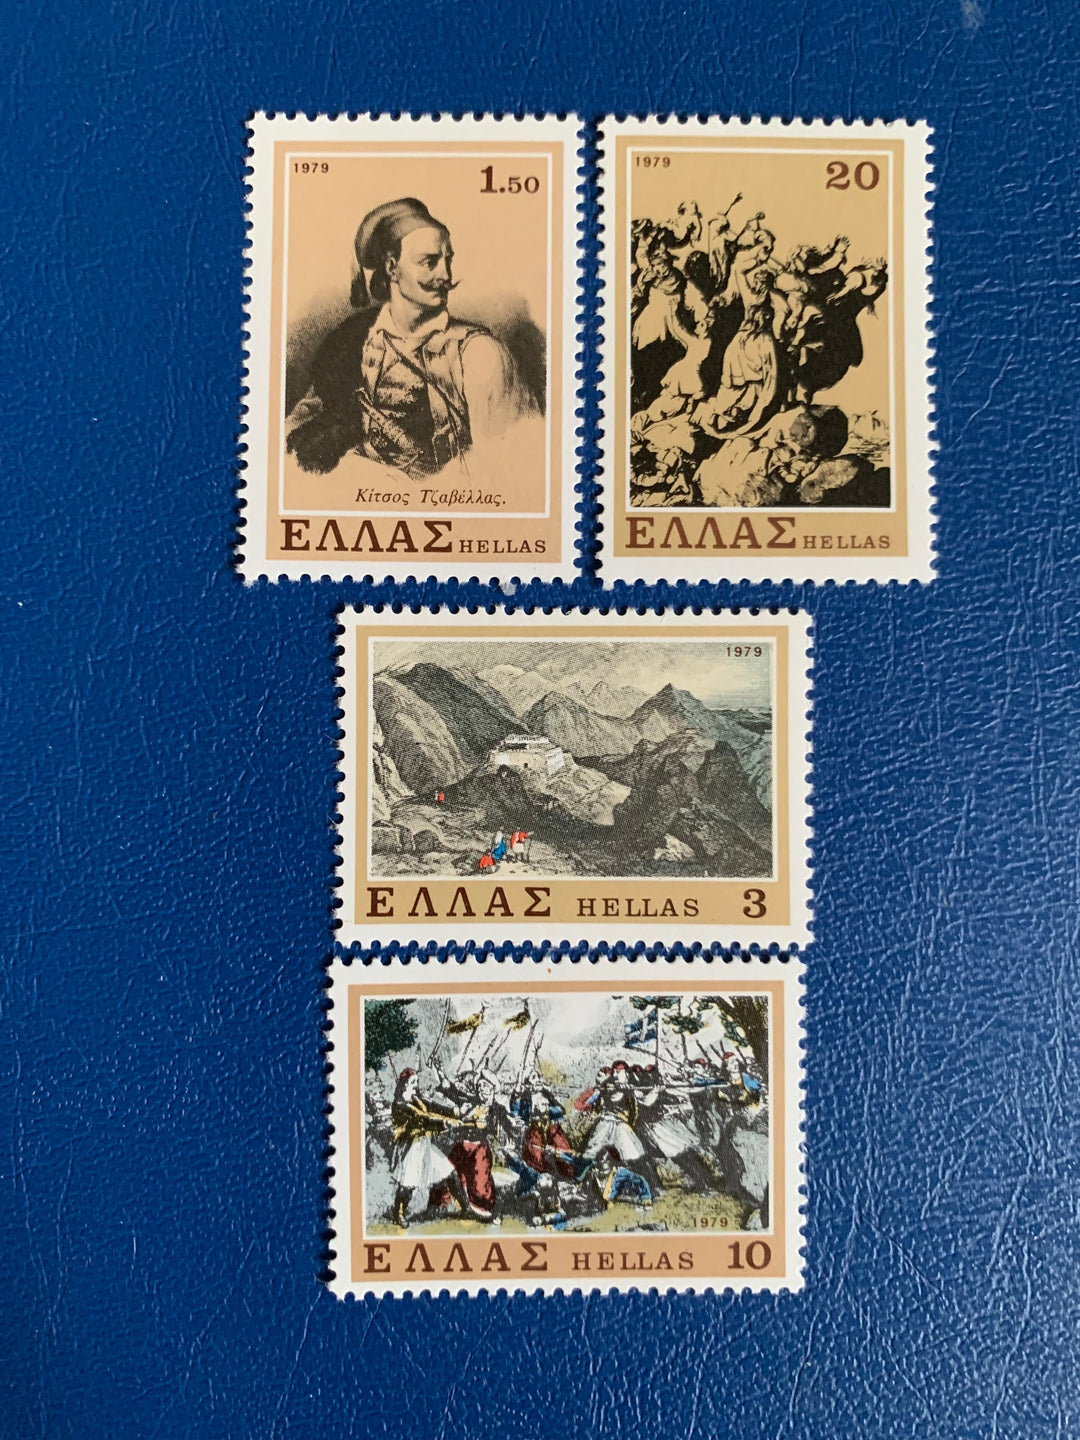 Greece - Original Vintage Postage Stamps- 1979 - Struggle of the Souliots -for the collector, artist or collector - scrapbooks, decoupage